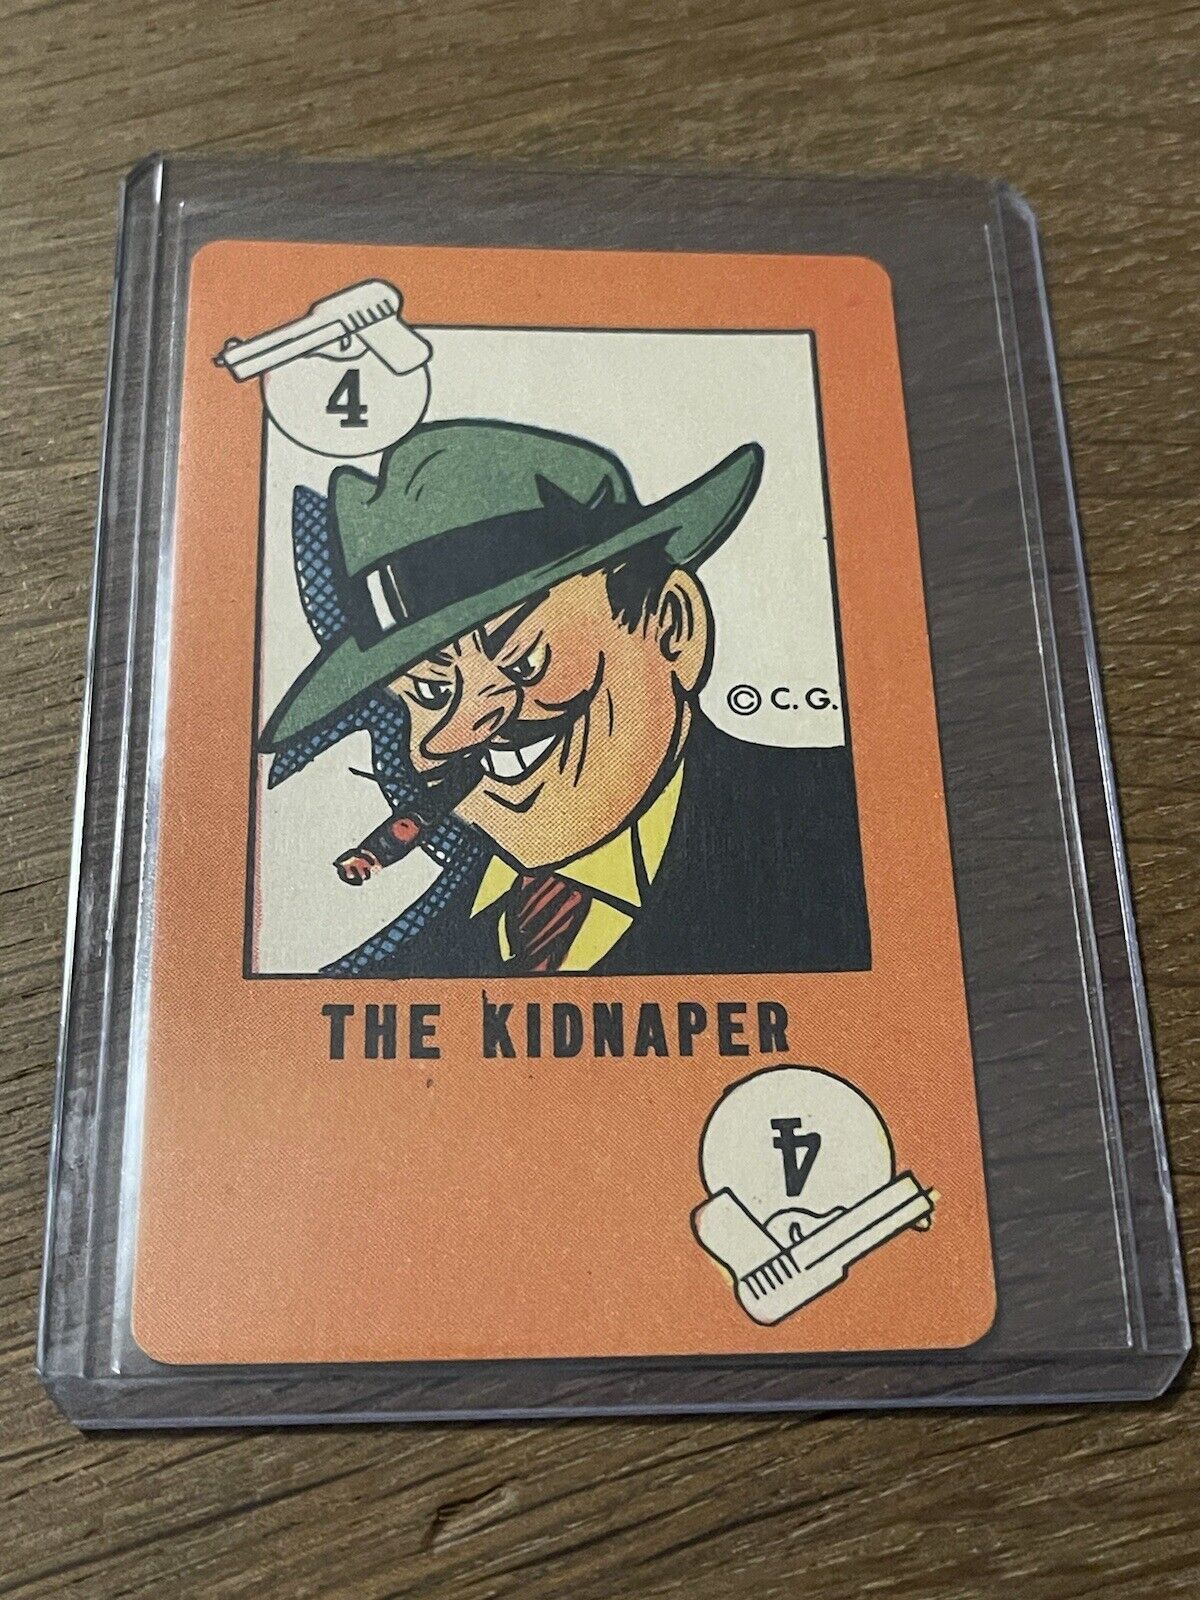 1941 WHITMAN DICK TRACY 🎥 PLAYING CARD GAME THE KIDNAPER PLAYING CARD RARE